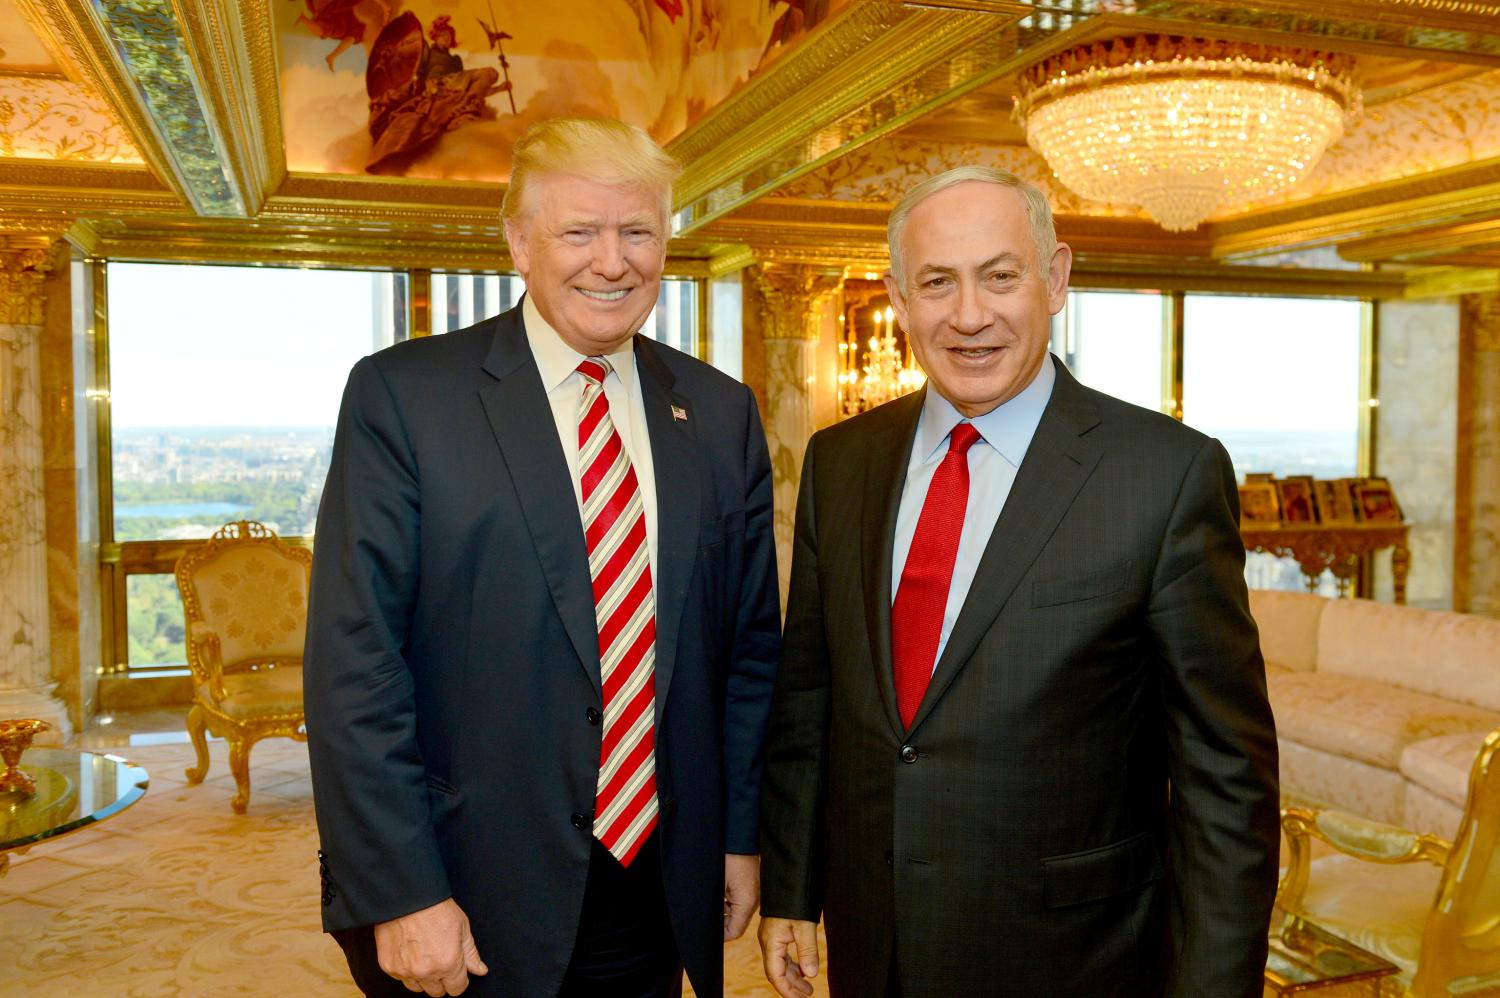 FILE PHOTO: Israeli Prime Minister Benjamin Netanyahu (R) stands next to Republican U.S. presidential candidate Donald Trump during their meeting in New York, September 25, 2016. Kobi Gideon/Government Press Office